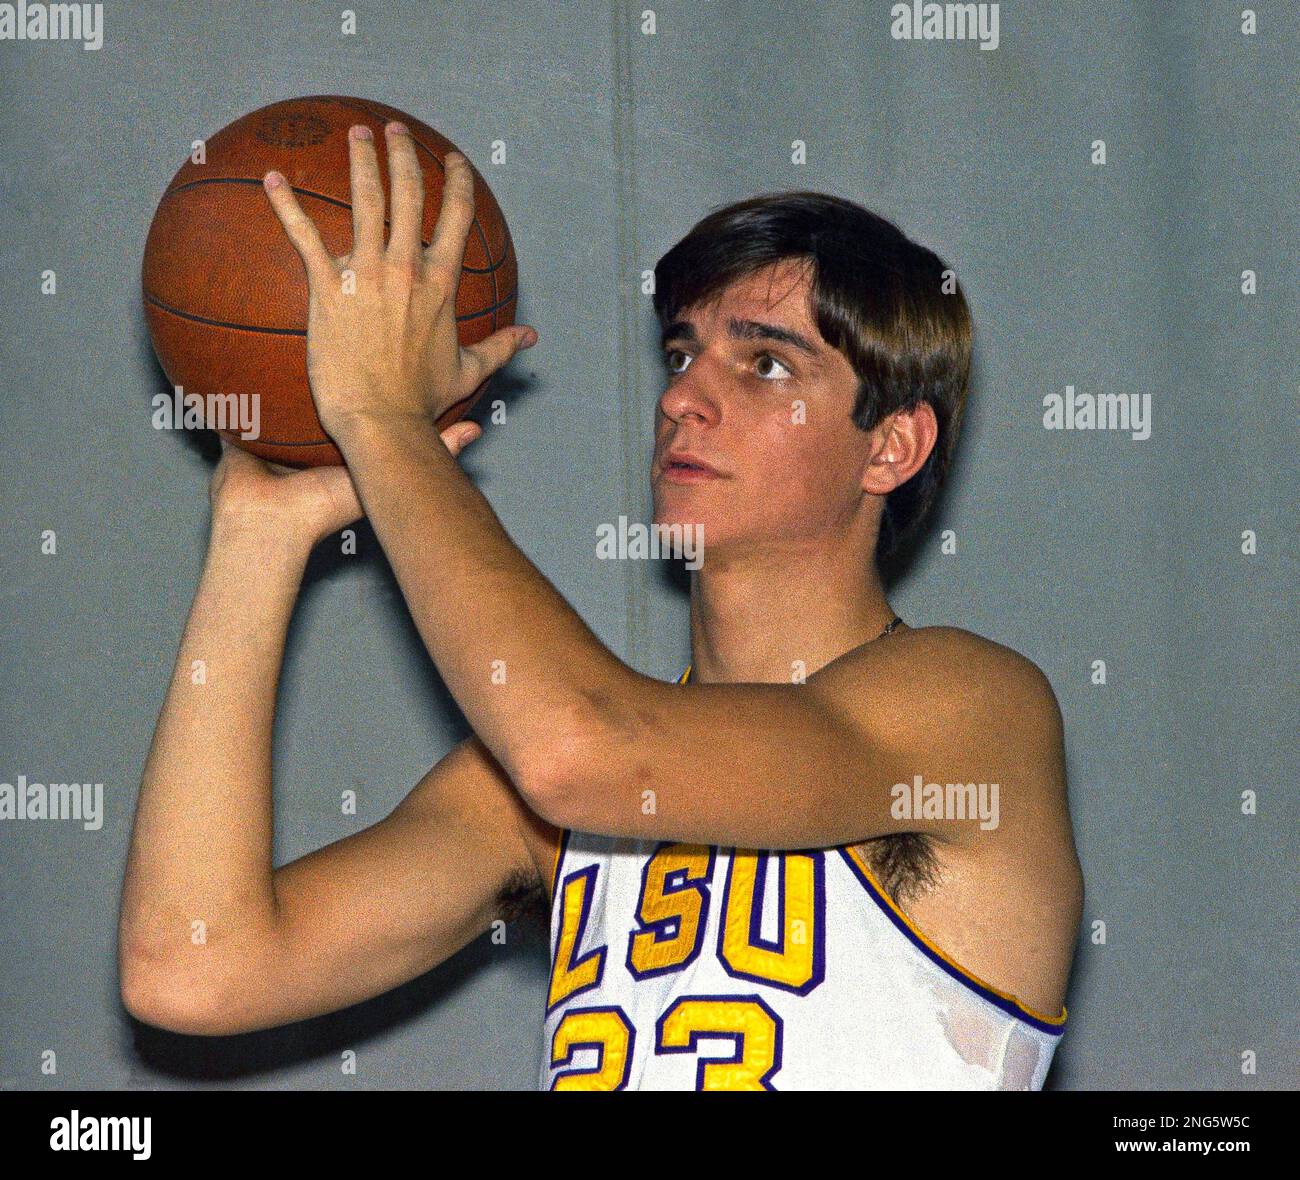 https://c8.alamy.com/comp/2NG5W5C/pistol-pete-pete-maravich-basketball-player-for-lsu-in-posed-action-in-new-orleans-la-nov-1969-ap-photo-2NG5W5C.jpg